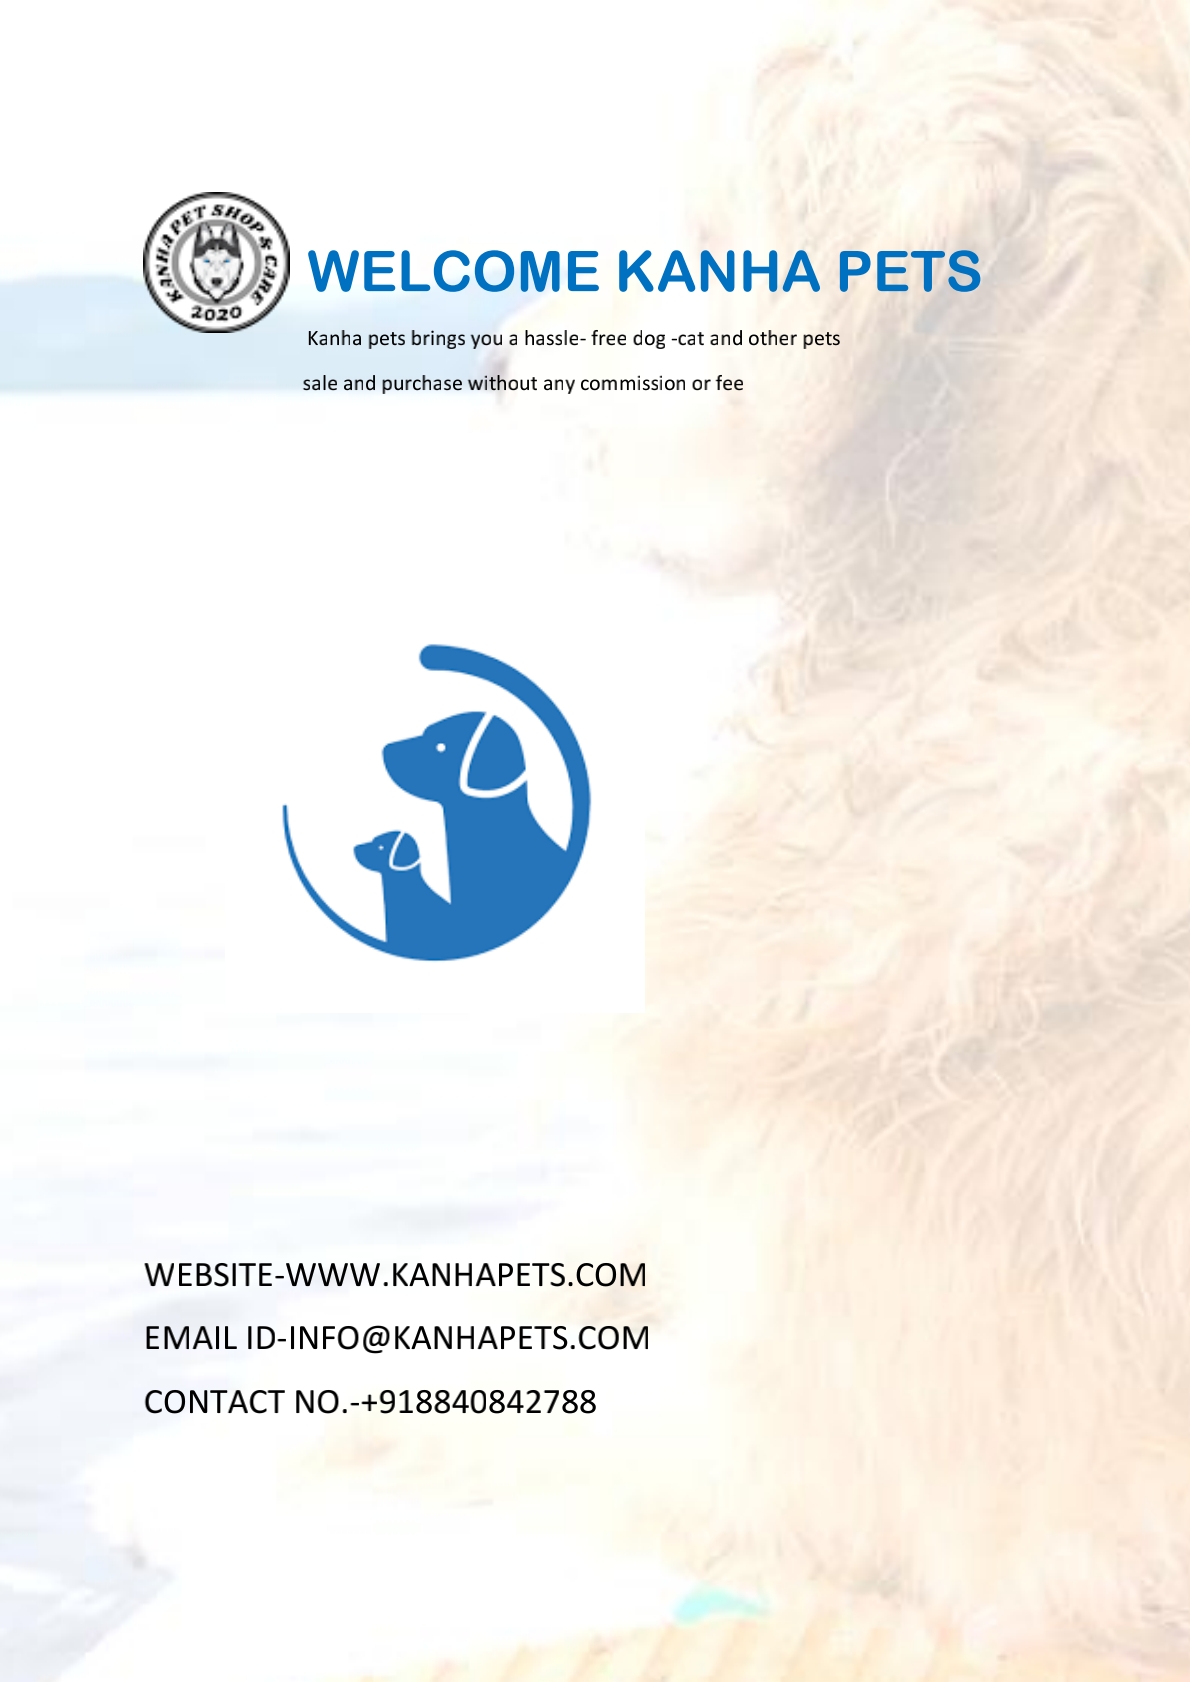 Best quality and healthy pets are available here